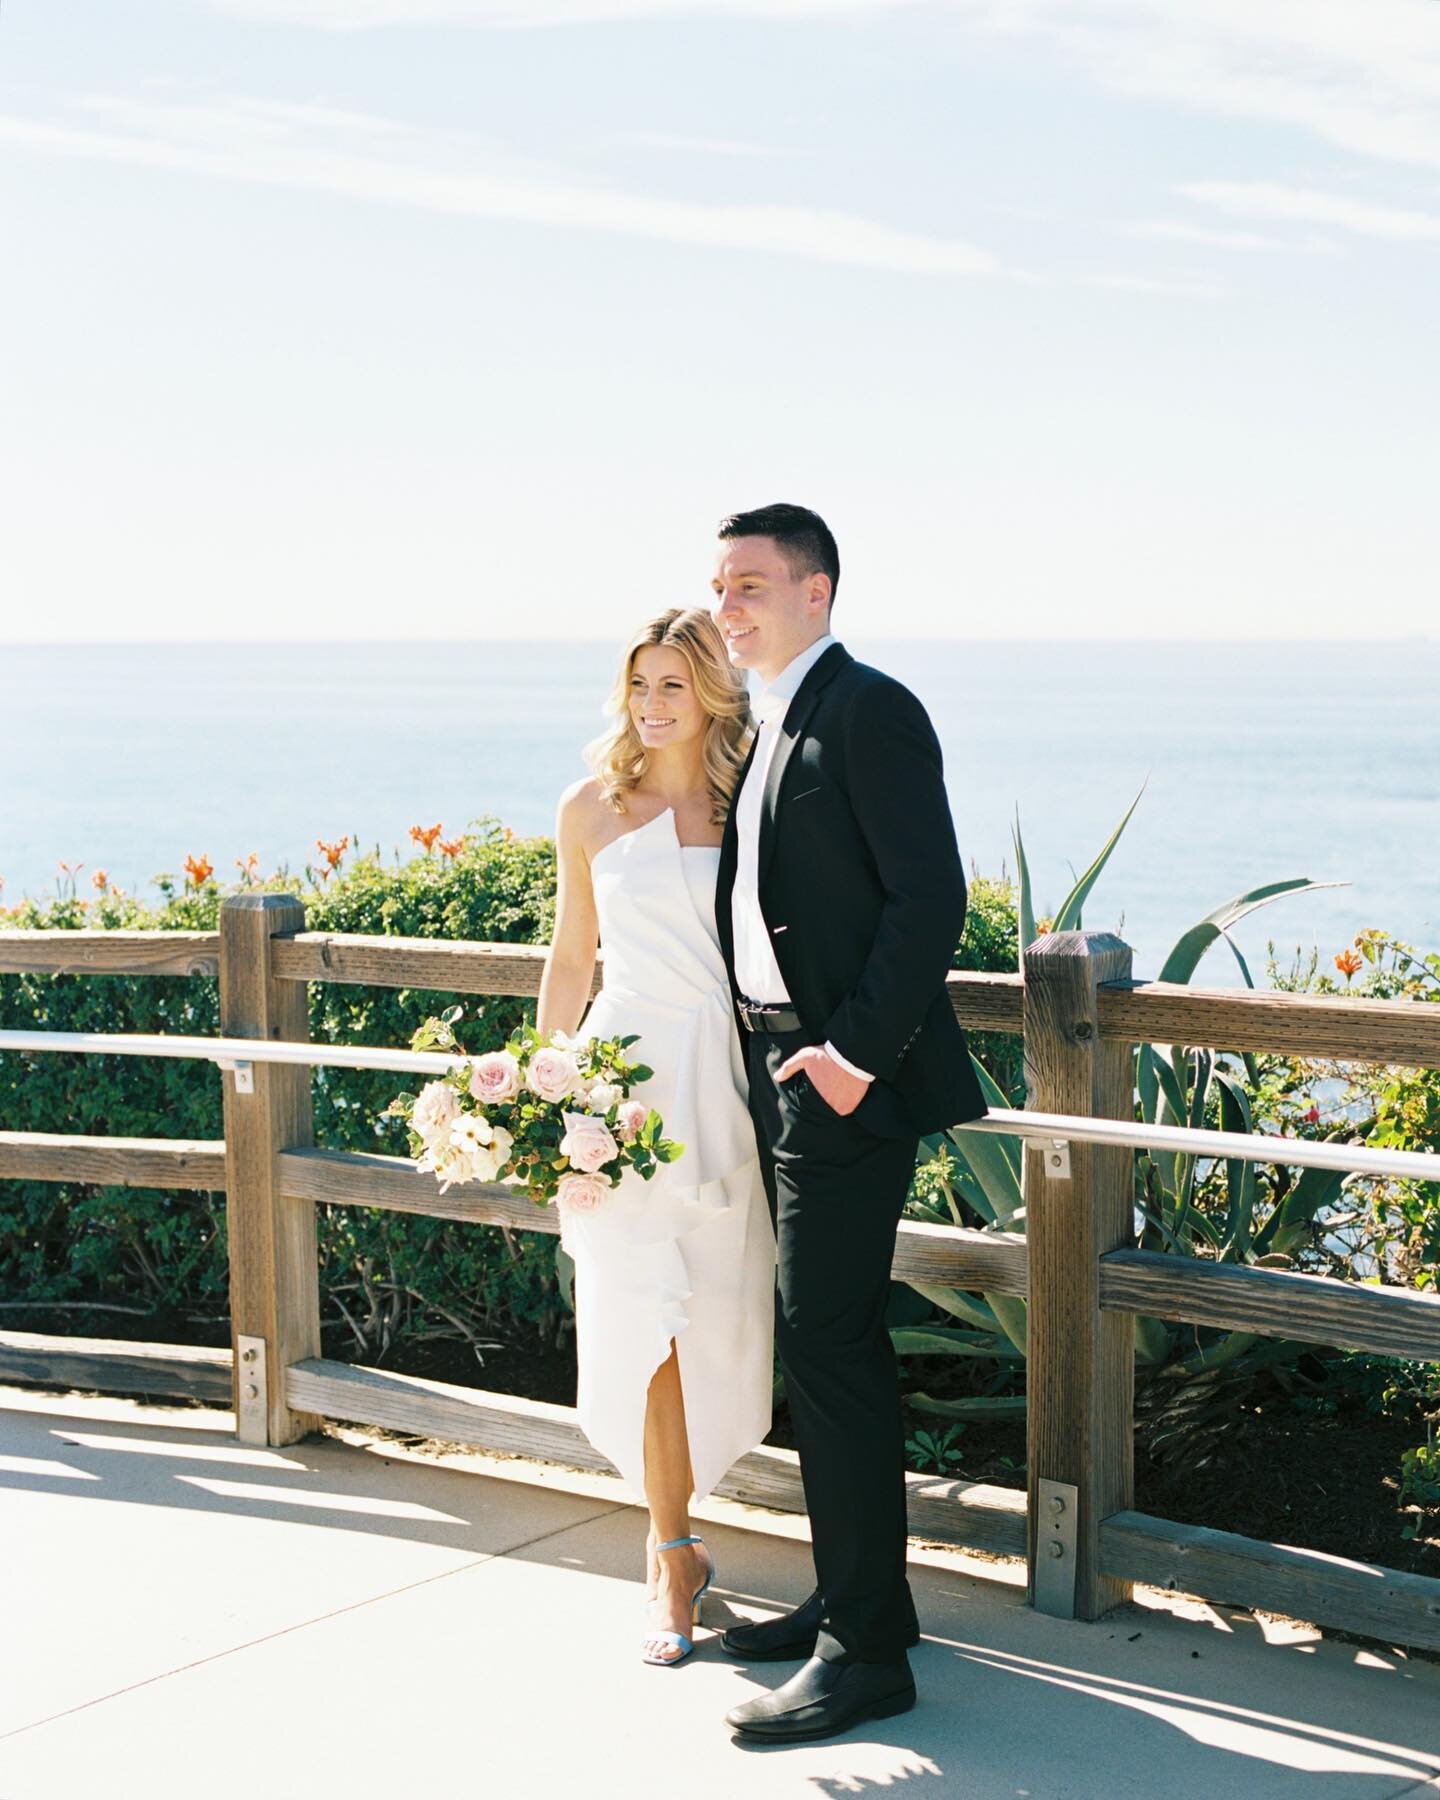 La Mar .|. A Blend Of Classic &amp; Stylish Poses Paired With A Jewel Toned Backdrop  Is Giving Engagement Vibes. Most Of Our Engagements Do Take Place At The Beach. Your Photos Stay Timeless As Beautiful. 

@wild_and_behold_florals
@kg.hairandmakeup